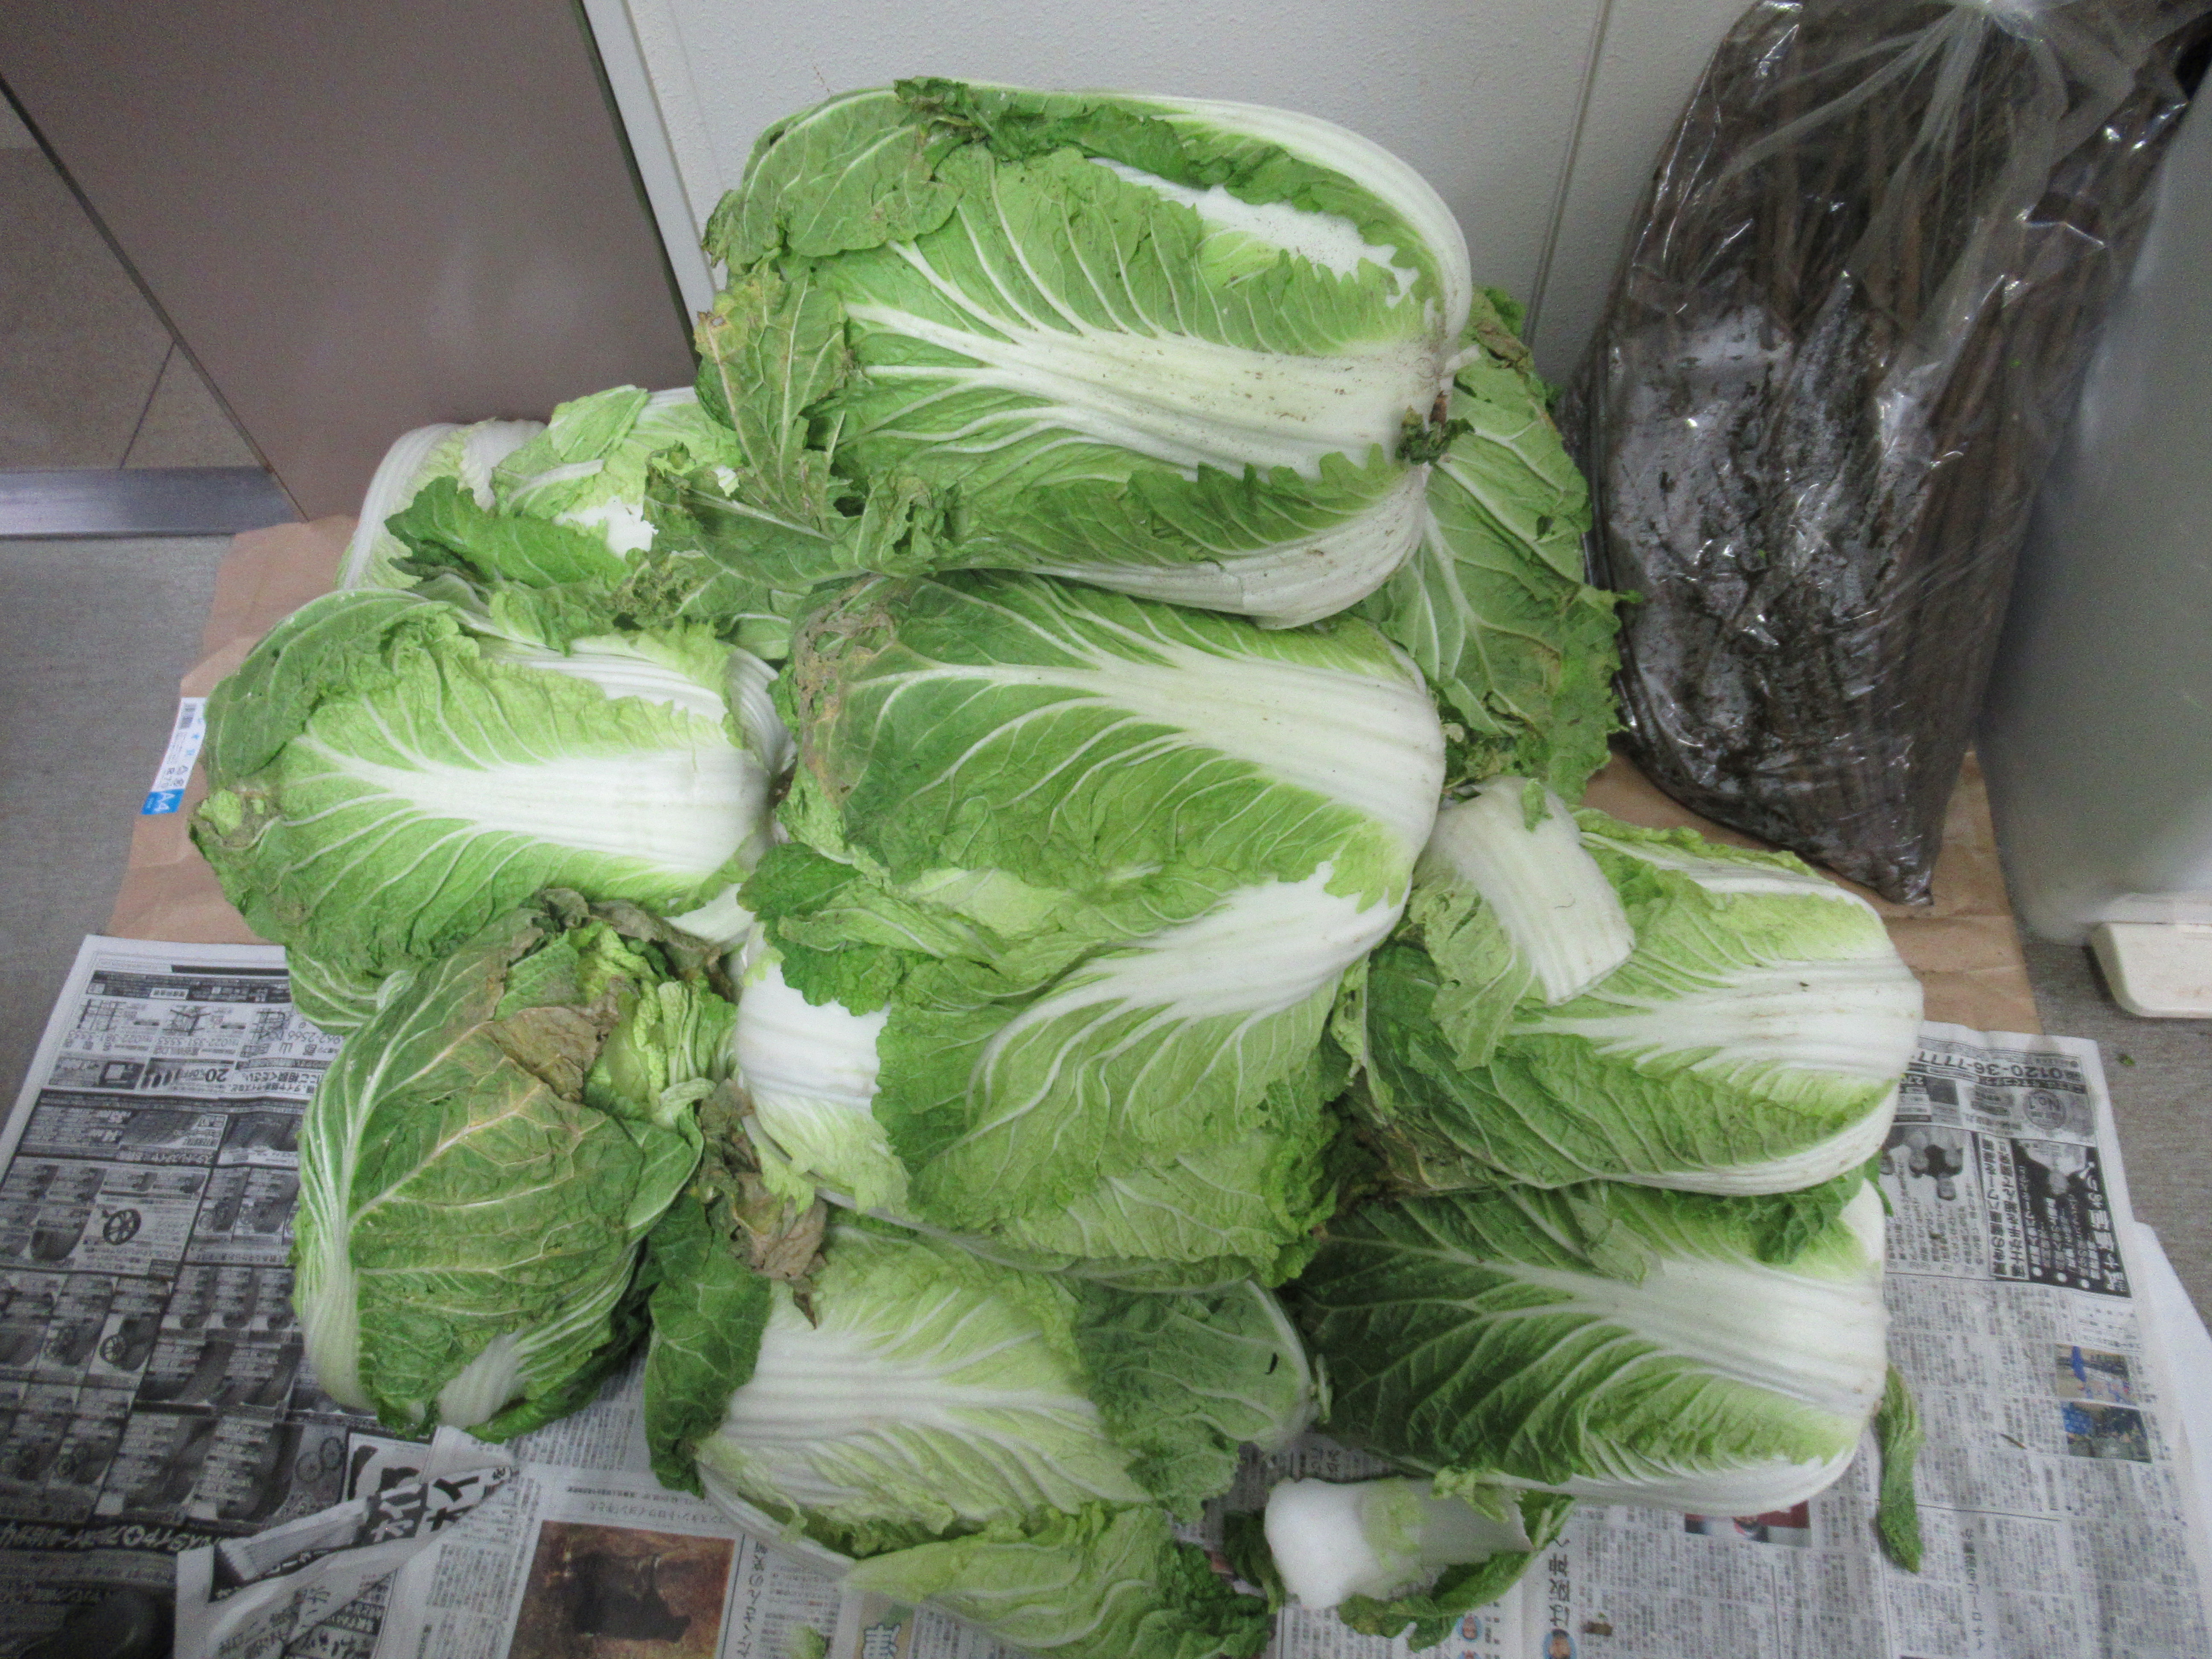 MS. Takahashi donated vegetables(Chinese cabbage and burdock) to the international students